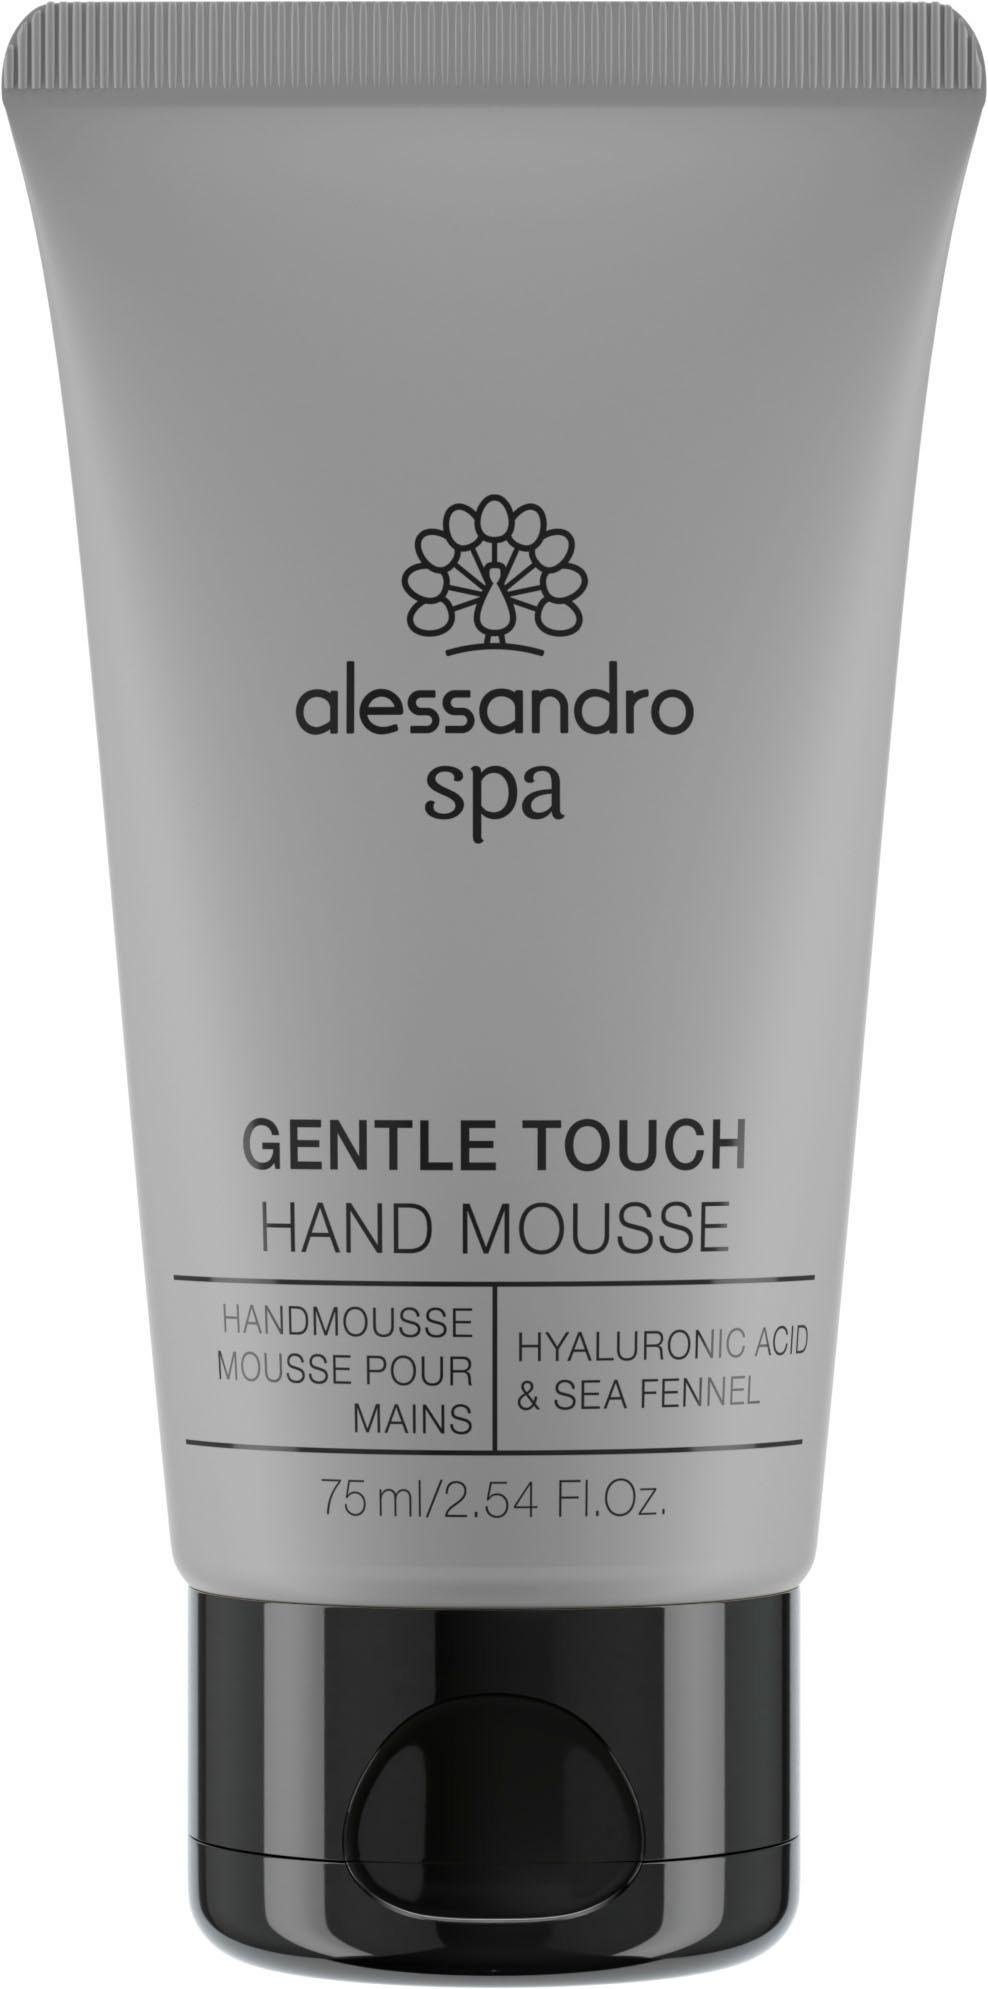 alessandro international Handmousse TOUCH GENTLE SPA